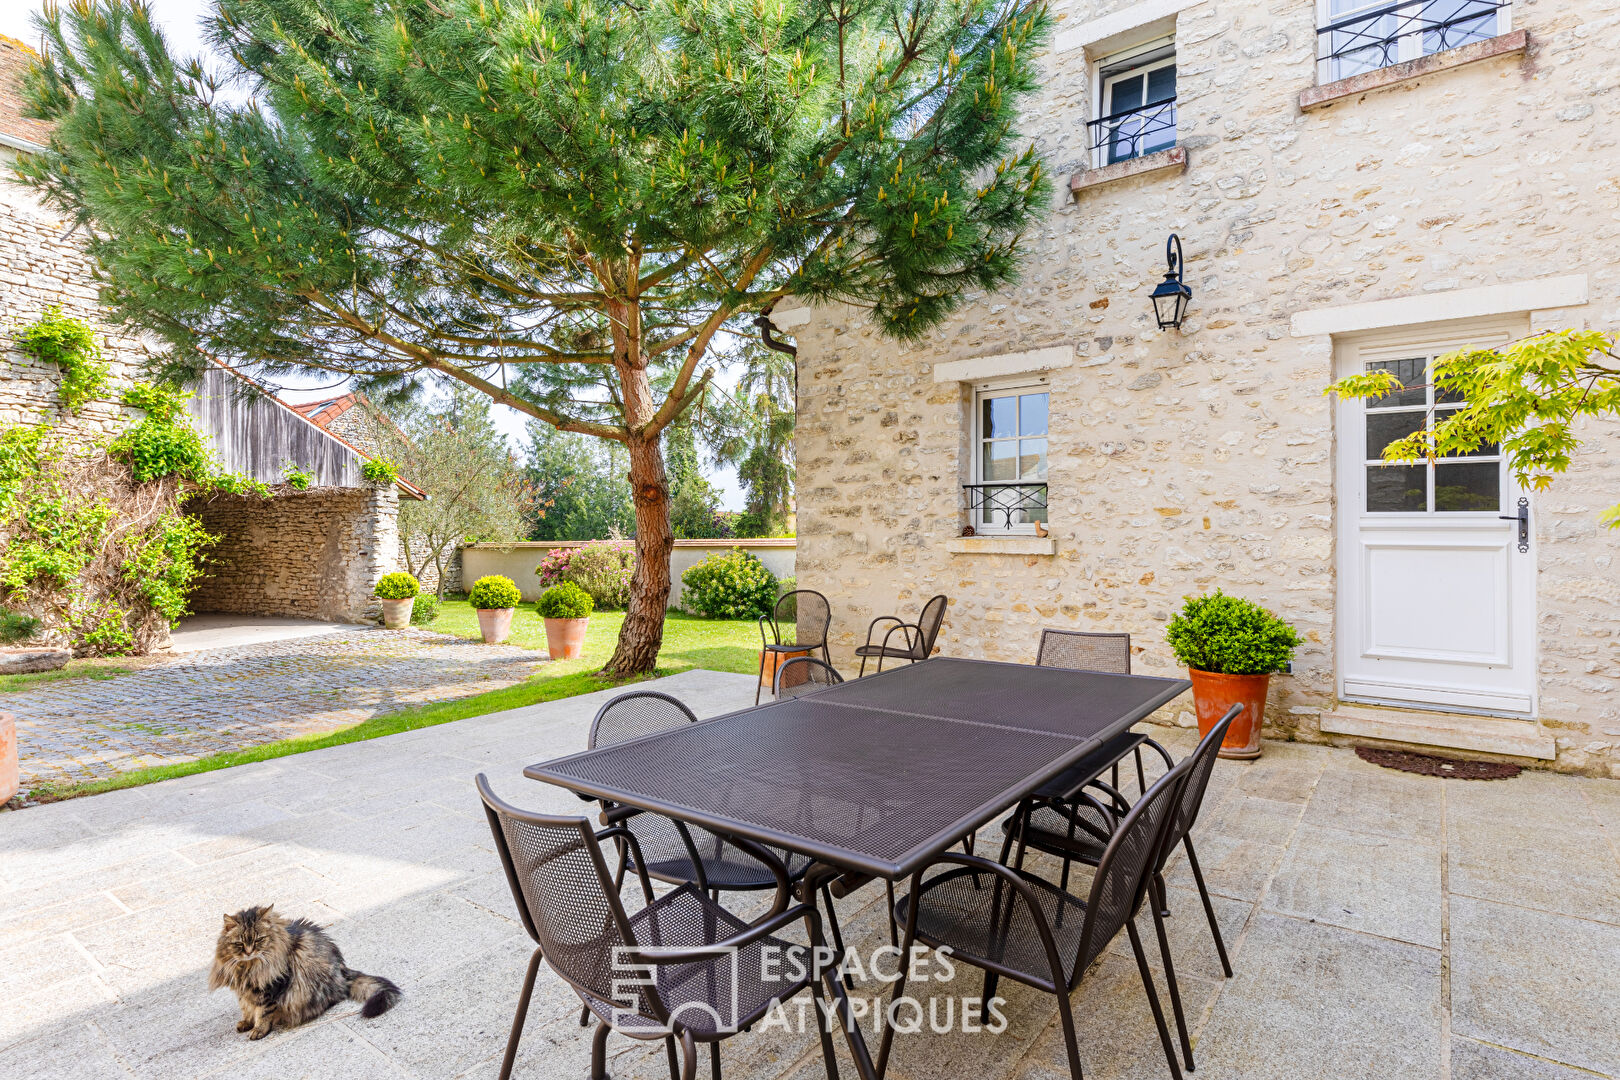 A little air of Provençal Bastide in the heart of Mantois